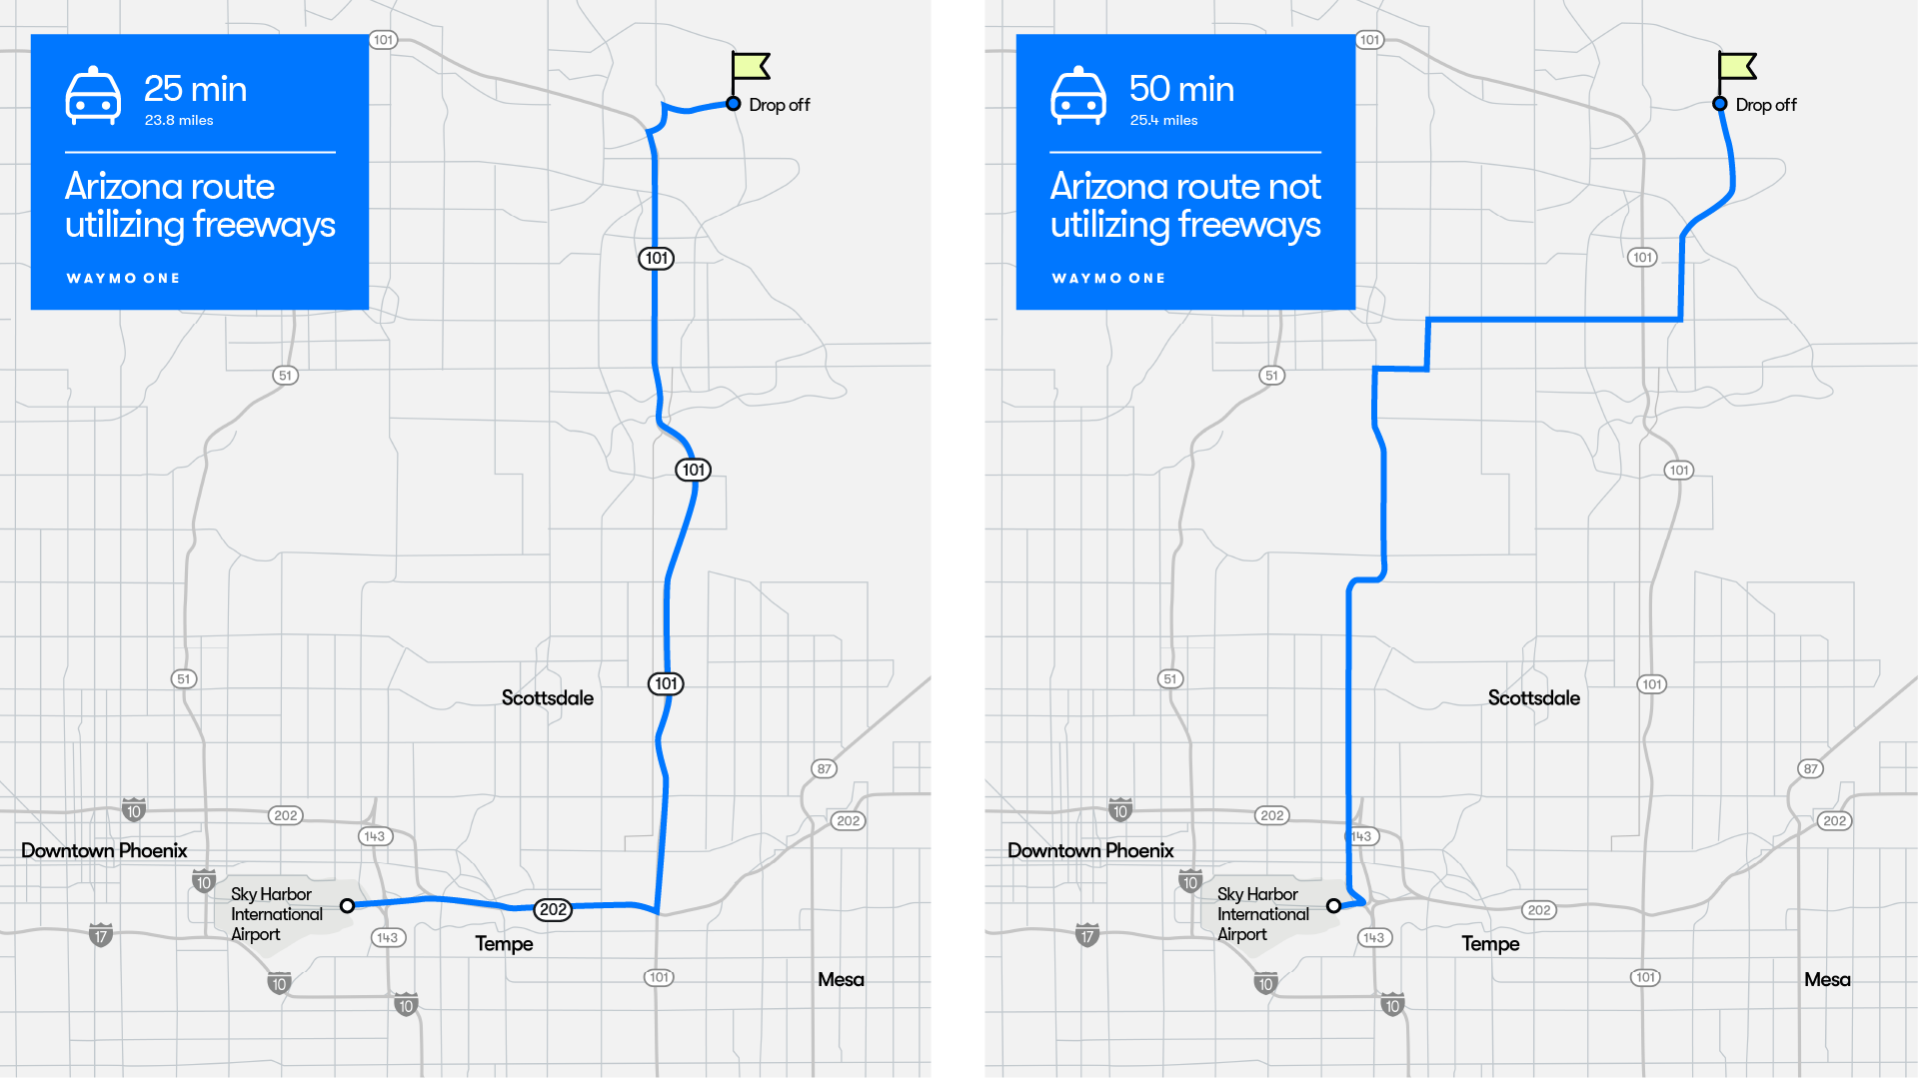 Example Waymo One routes using freeways versus using only surface streets